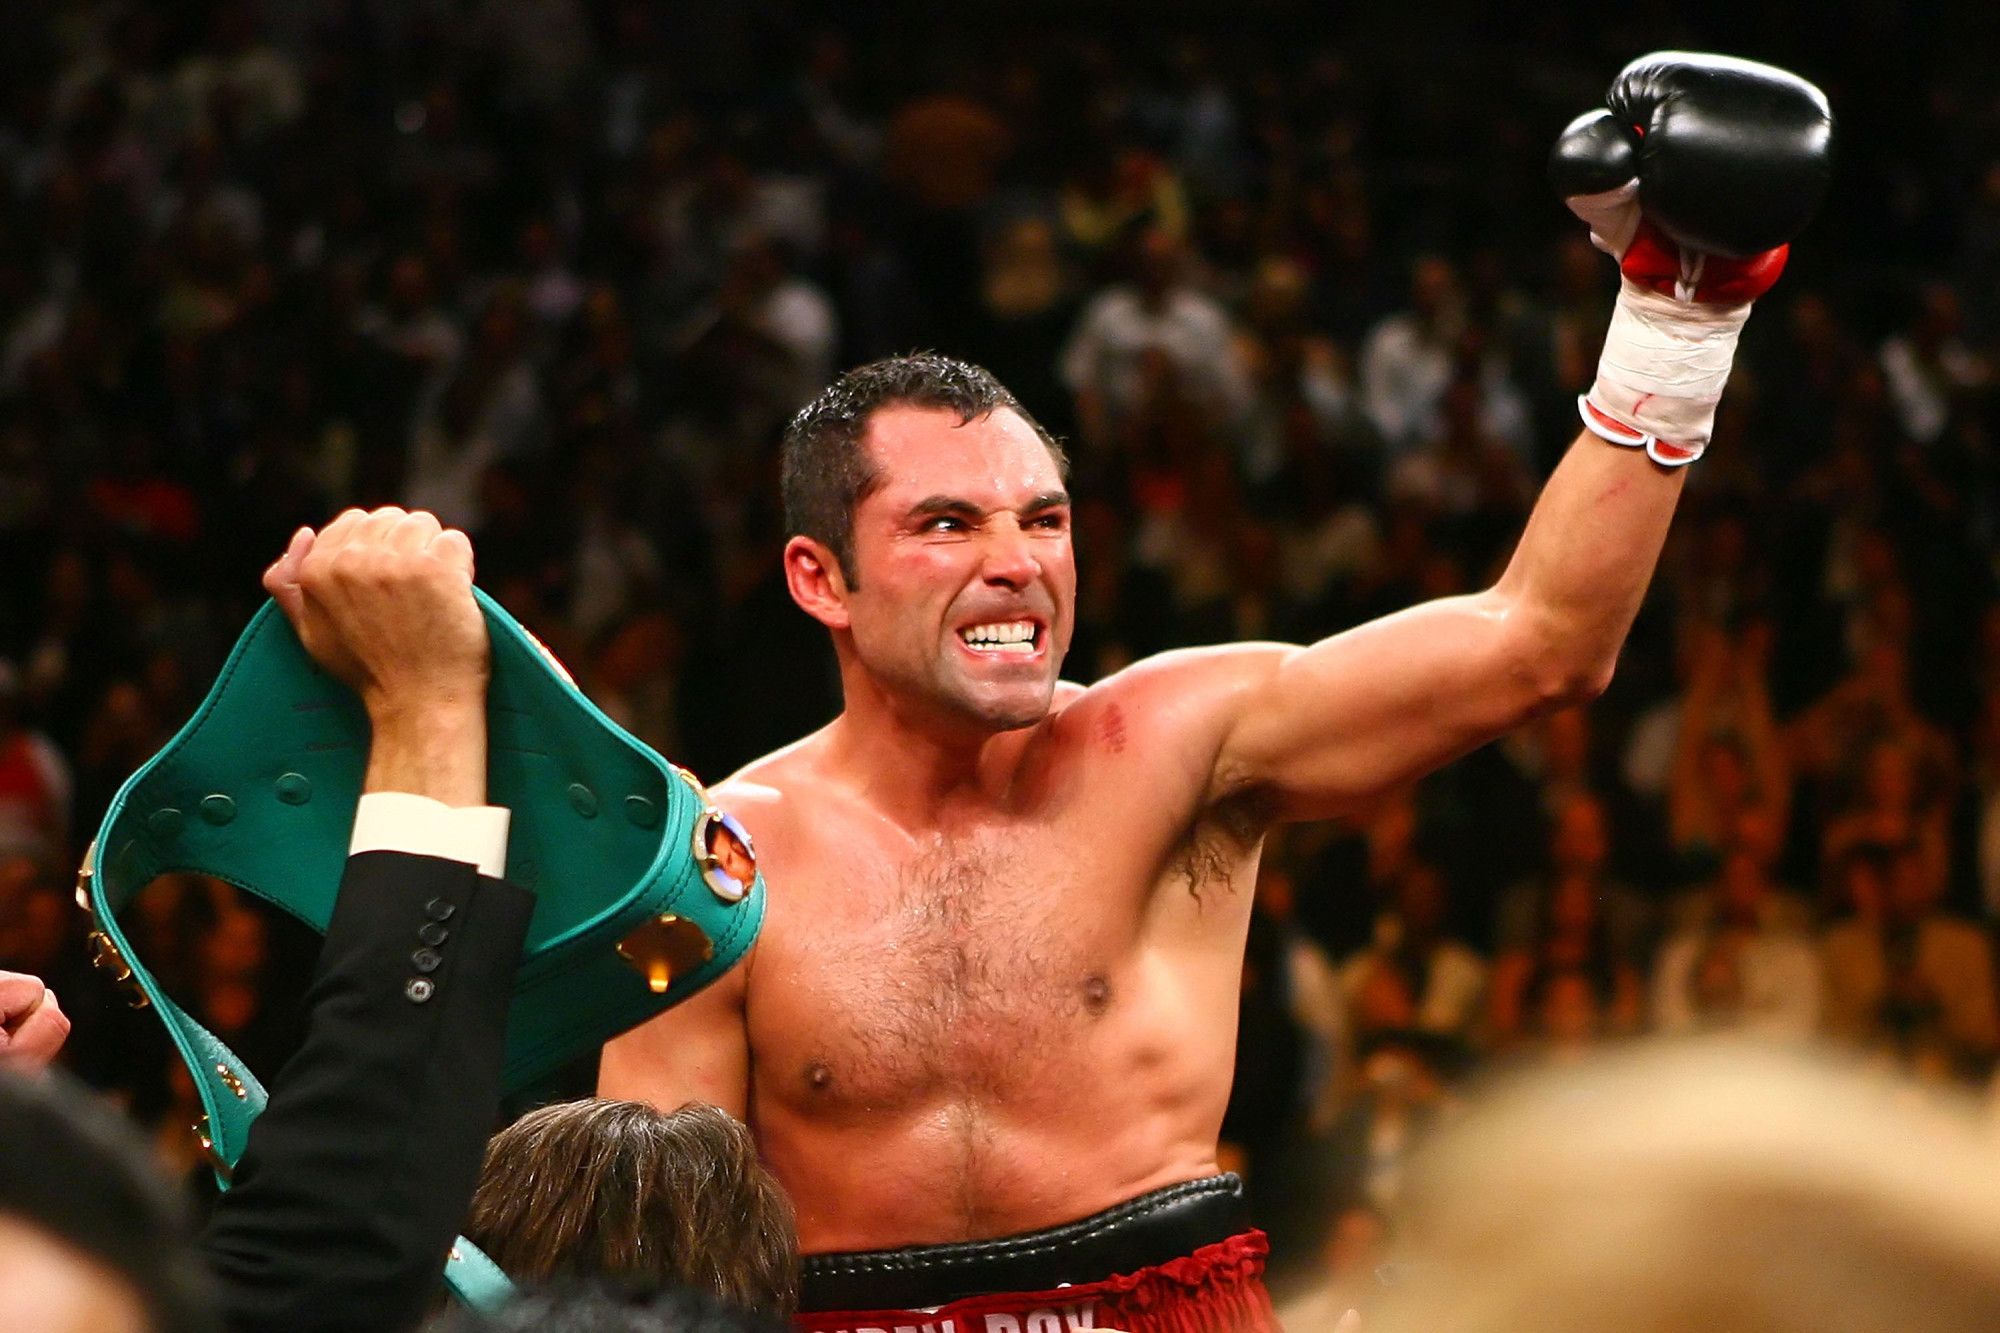 Legendary Boxer Oscar Dela Hoya won the fight wallpaper and image, picture, photo